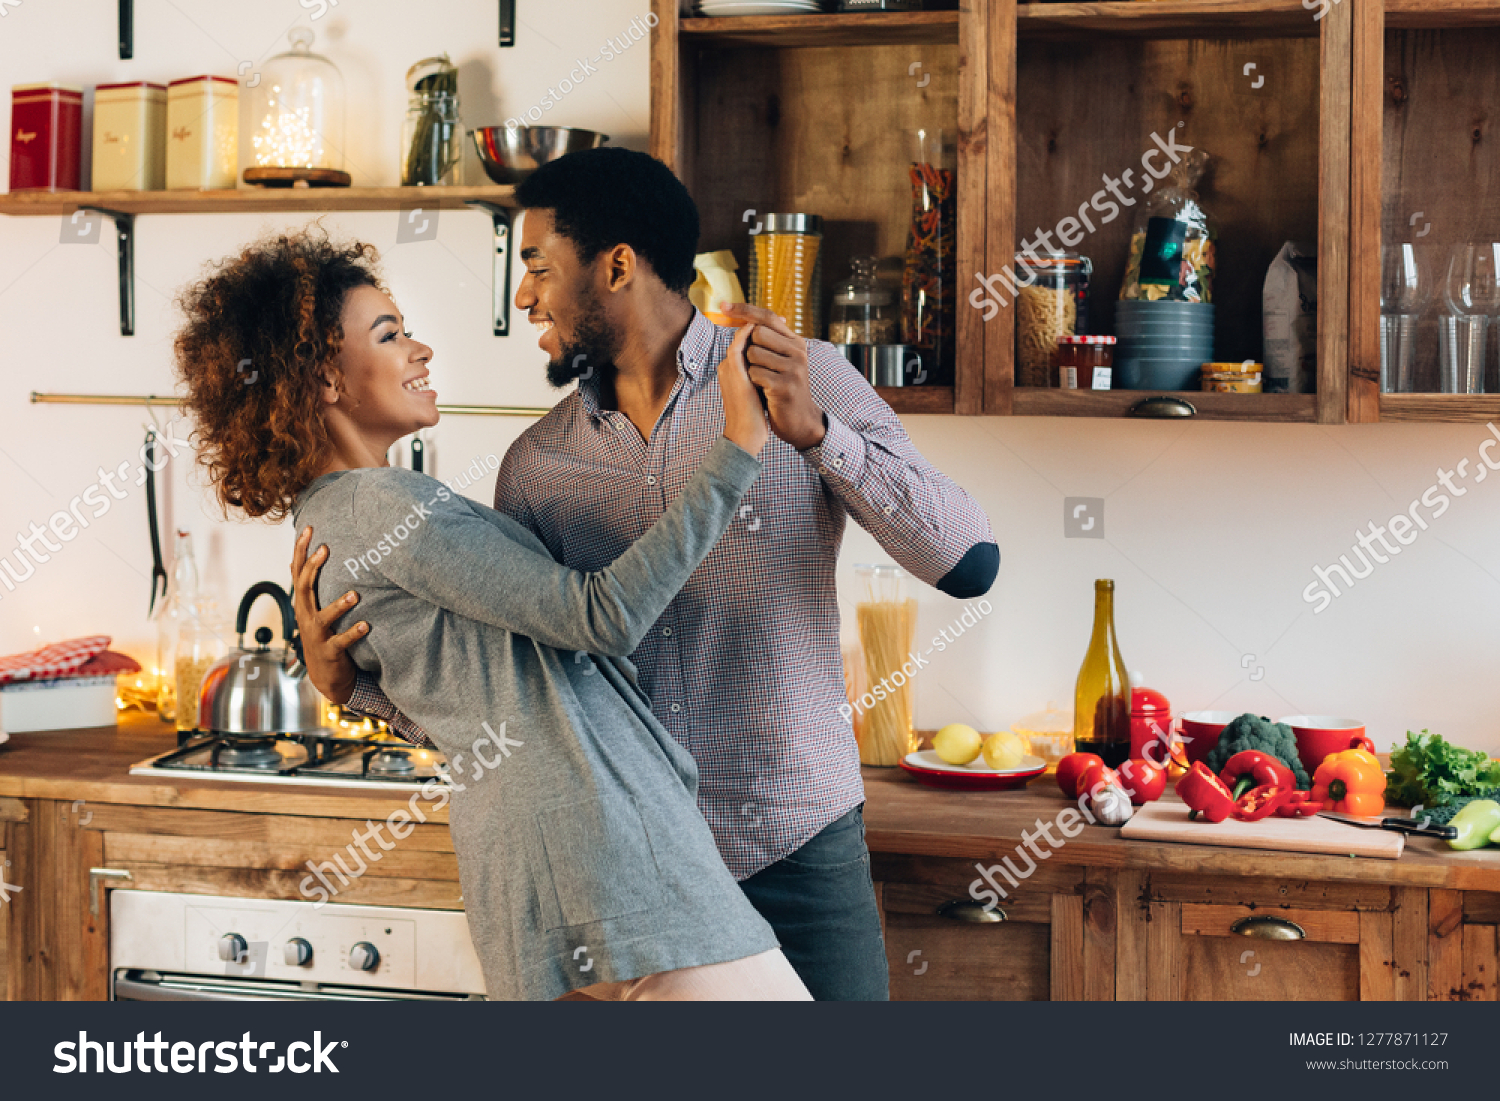 Happy moments. Young african-american couple in love dancing in kitchen, copy space #1277871127